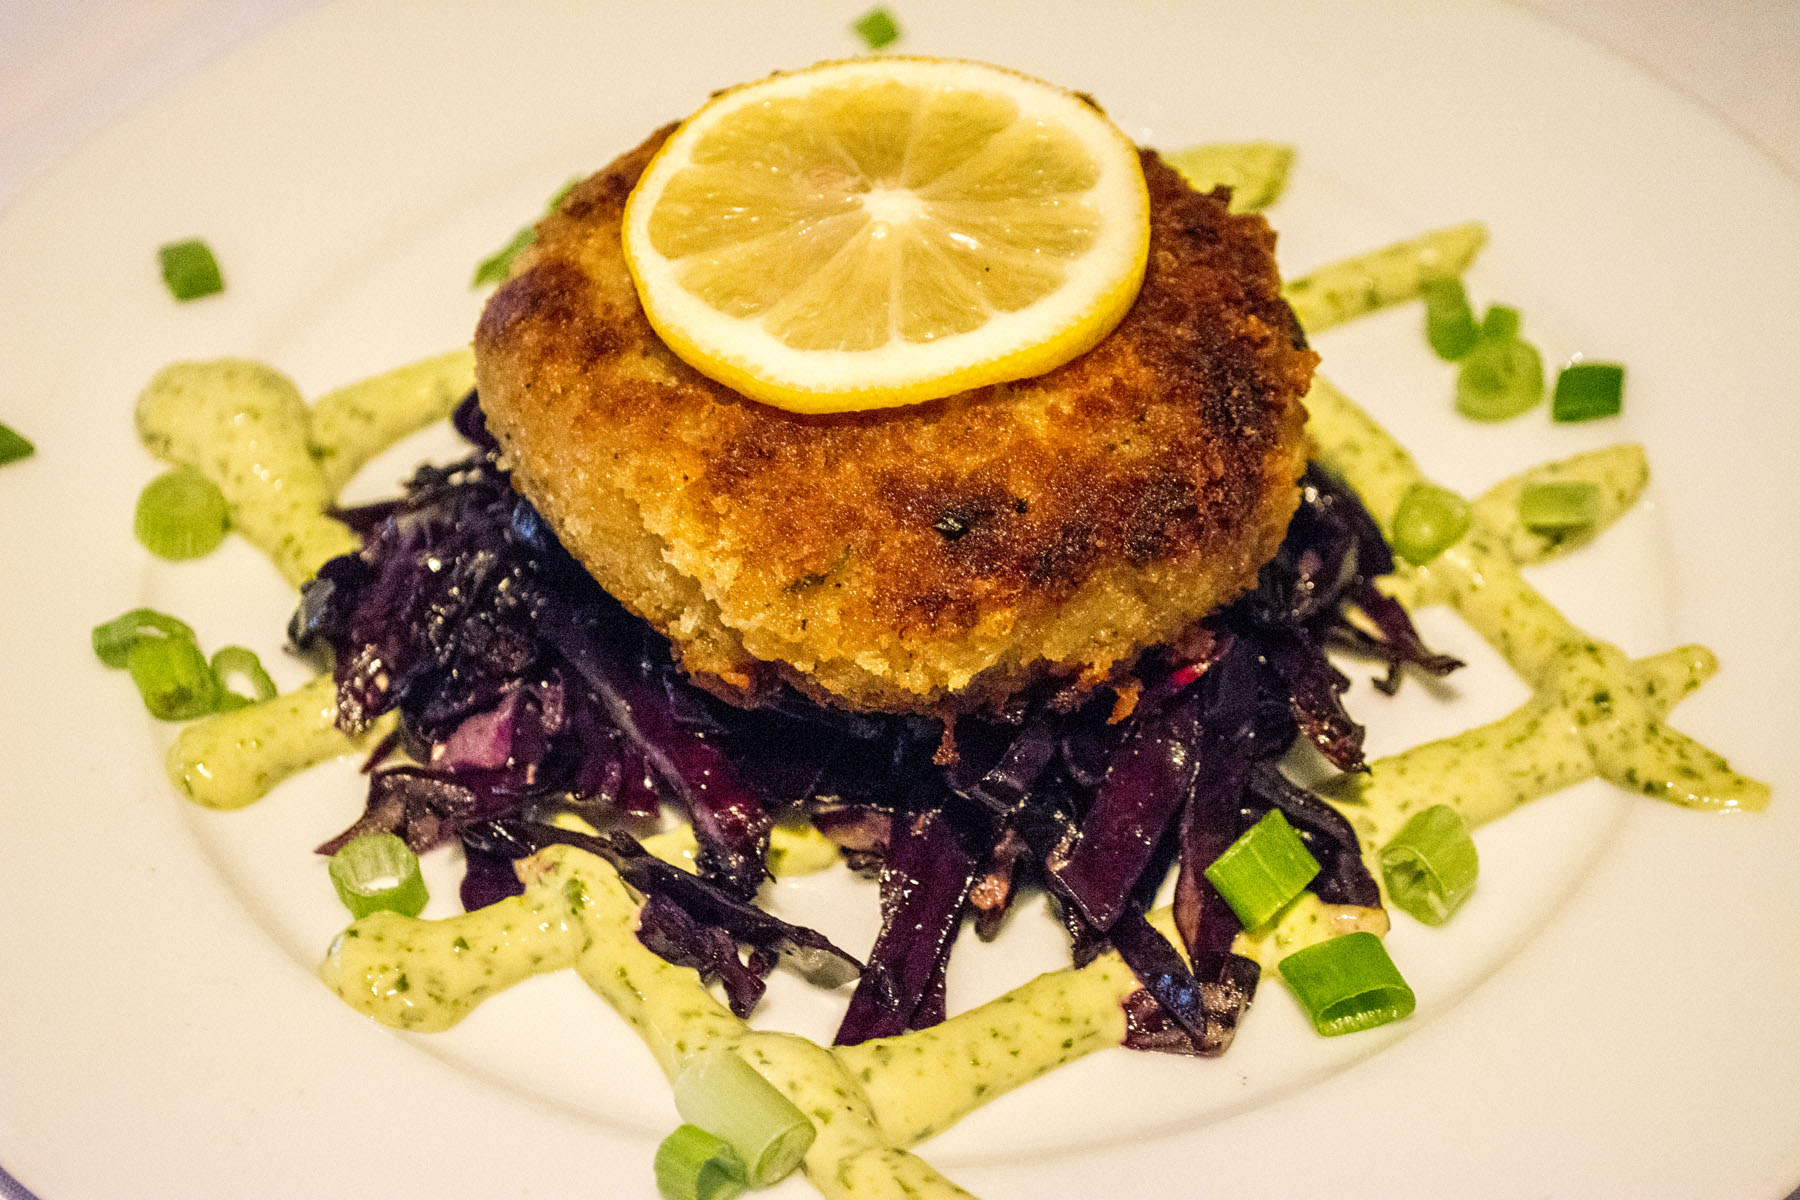   The Torta de Cangrejo ($13) is a jumbo lump crab cake tossed in panko breadcrumbs and served with basil aioli and sautéed red cabbage.   Long Islander News photos/Connor Beach  